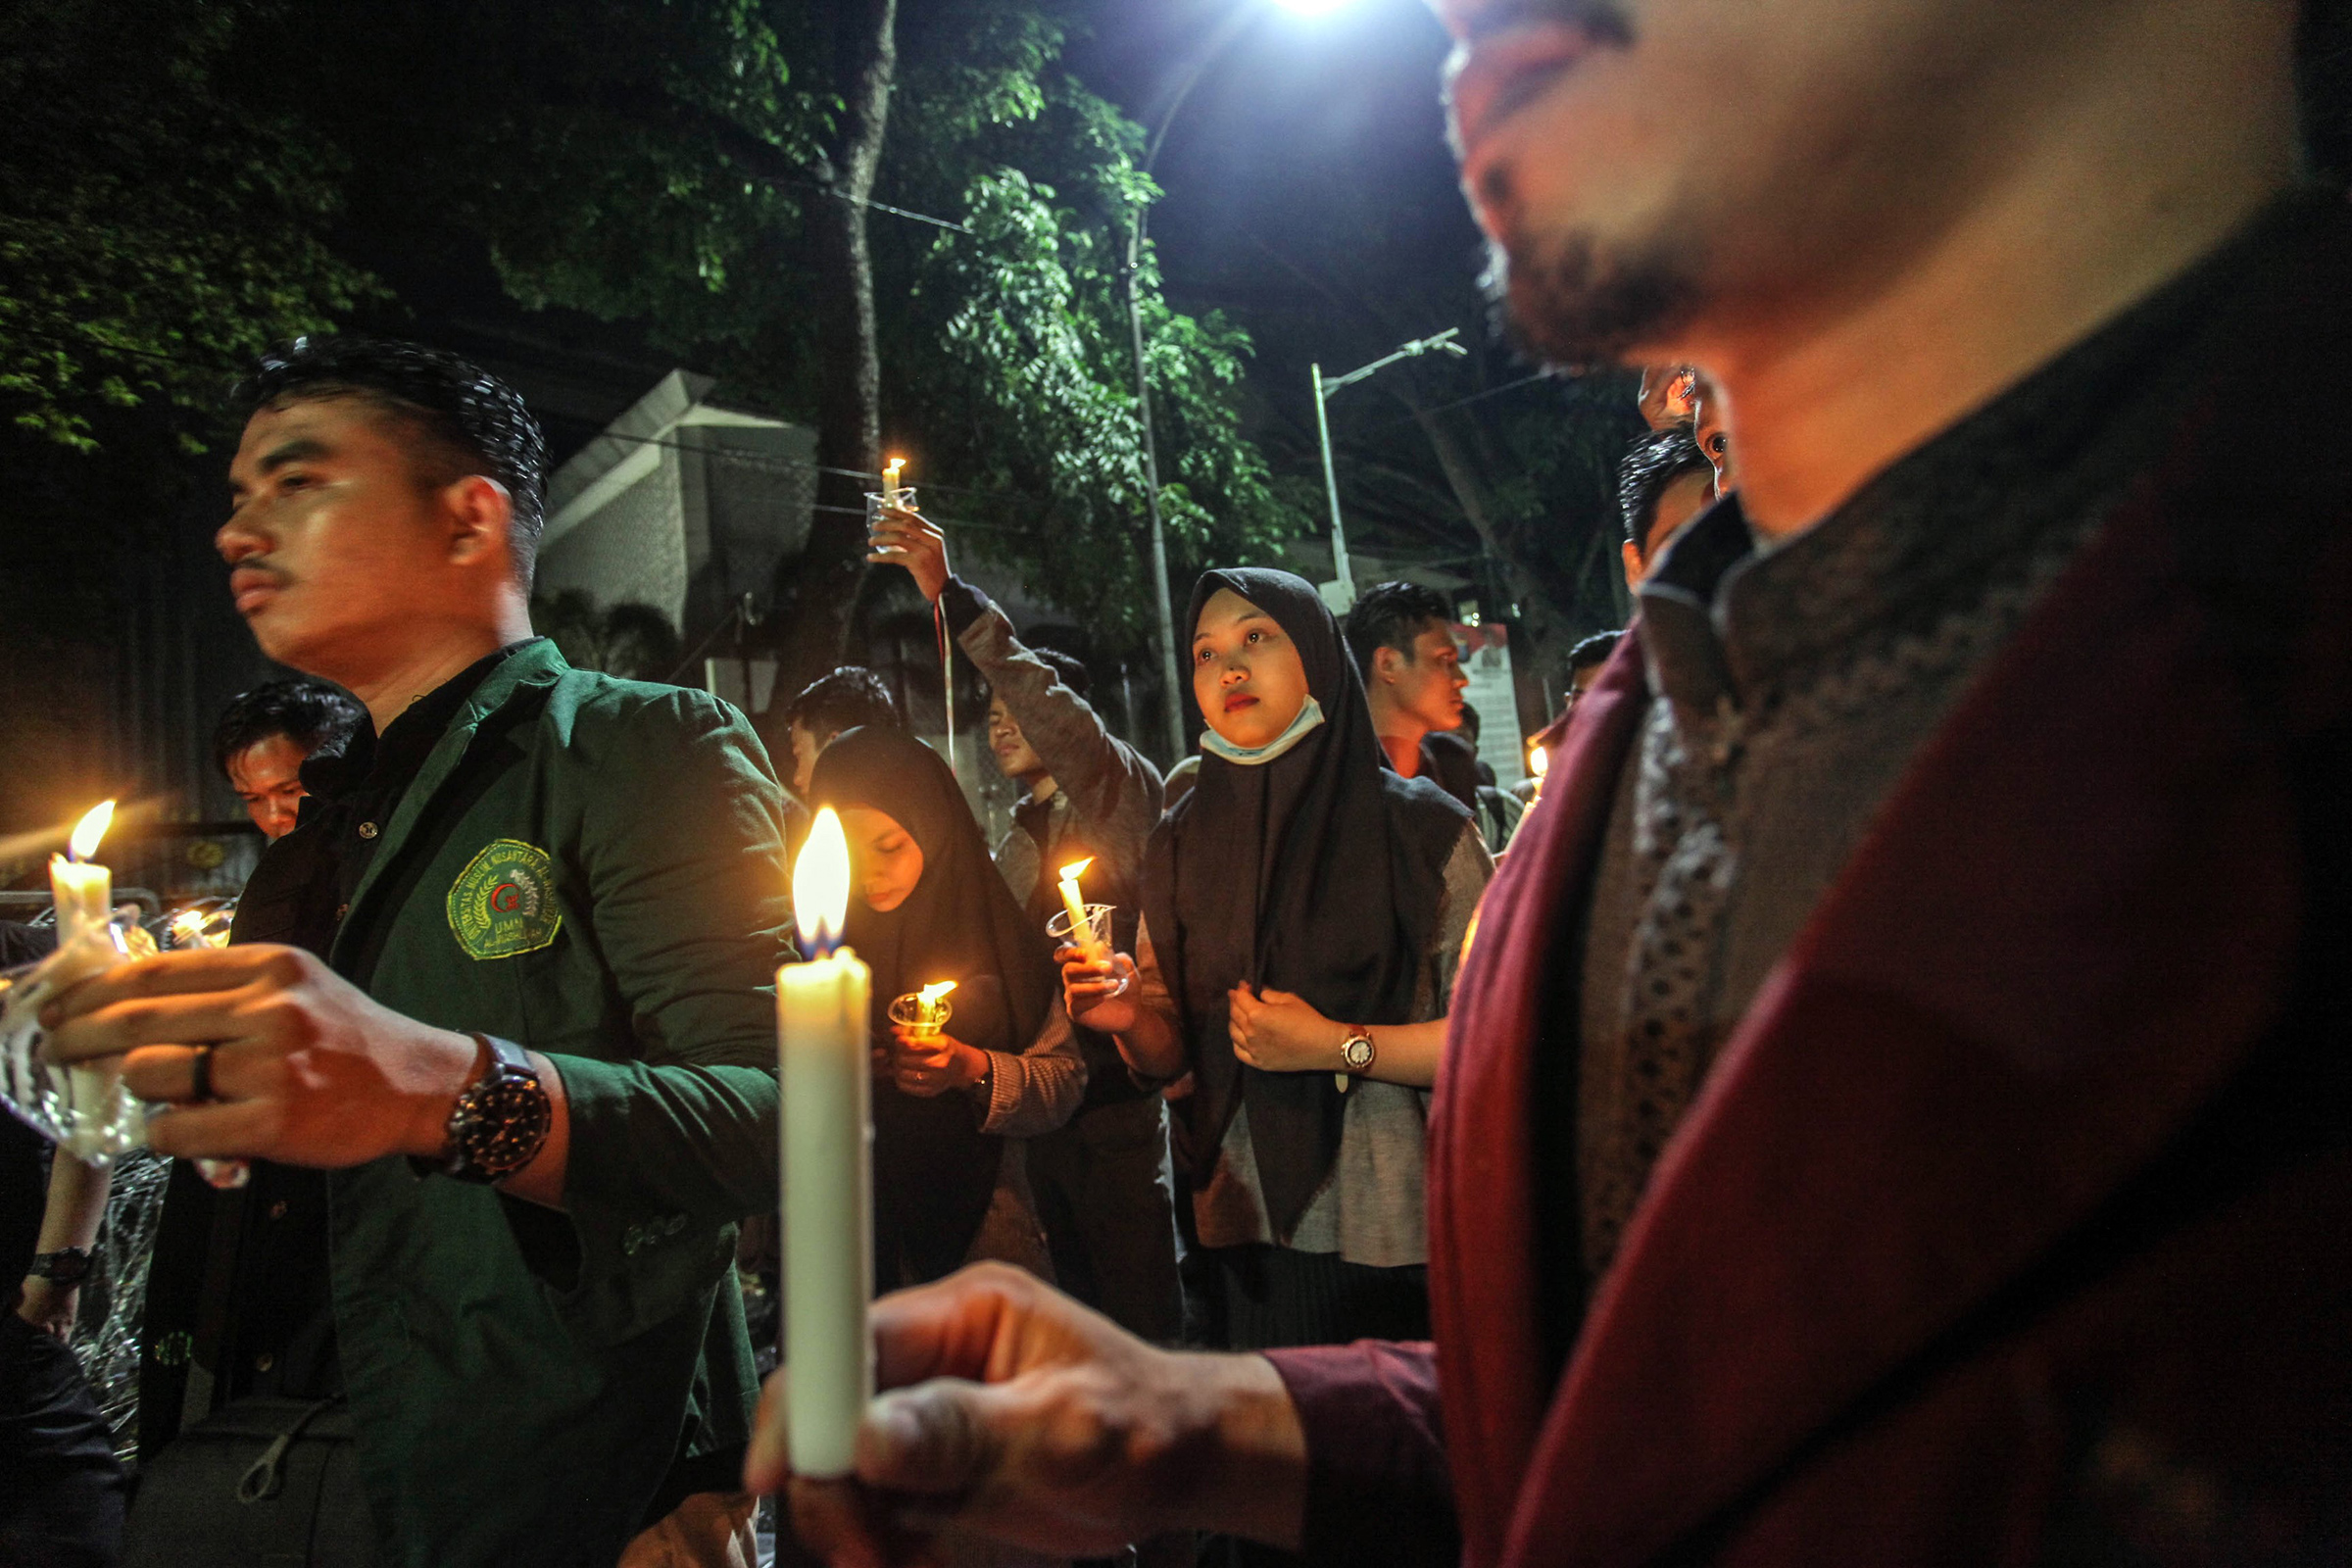 Indonesian students hold candles during a protest in Medan, Indonesia on Oct. 1, 2019 against the government's proposed change in its criminal code laws, plans to weaken the anti-corruption commission and riot victims in Wamena (Albert Ivan Damanik—Anadolu Agency/Getty Images)